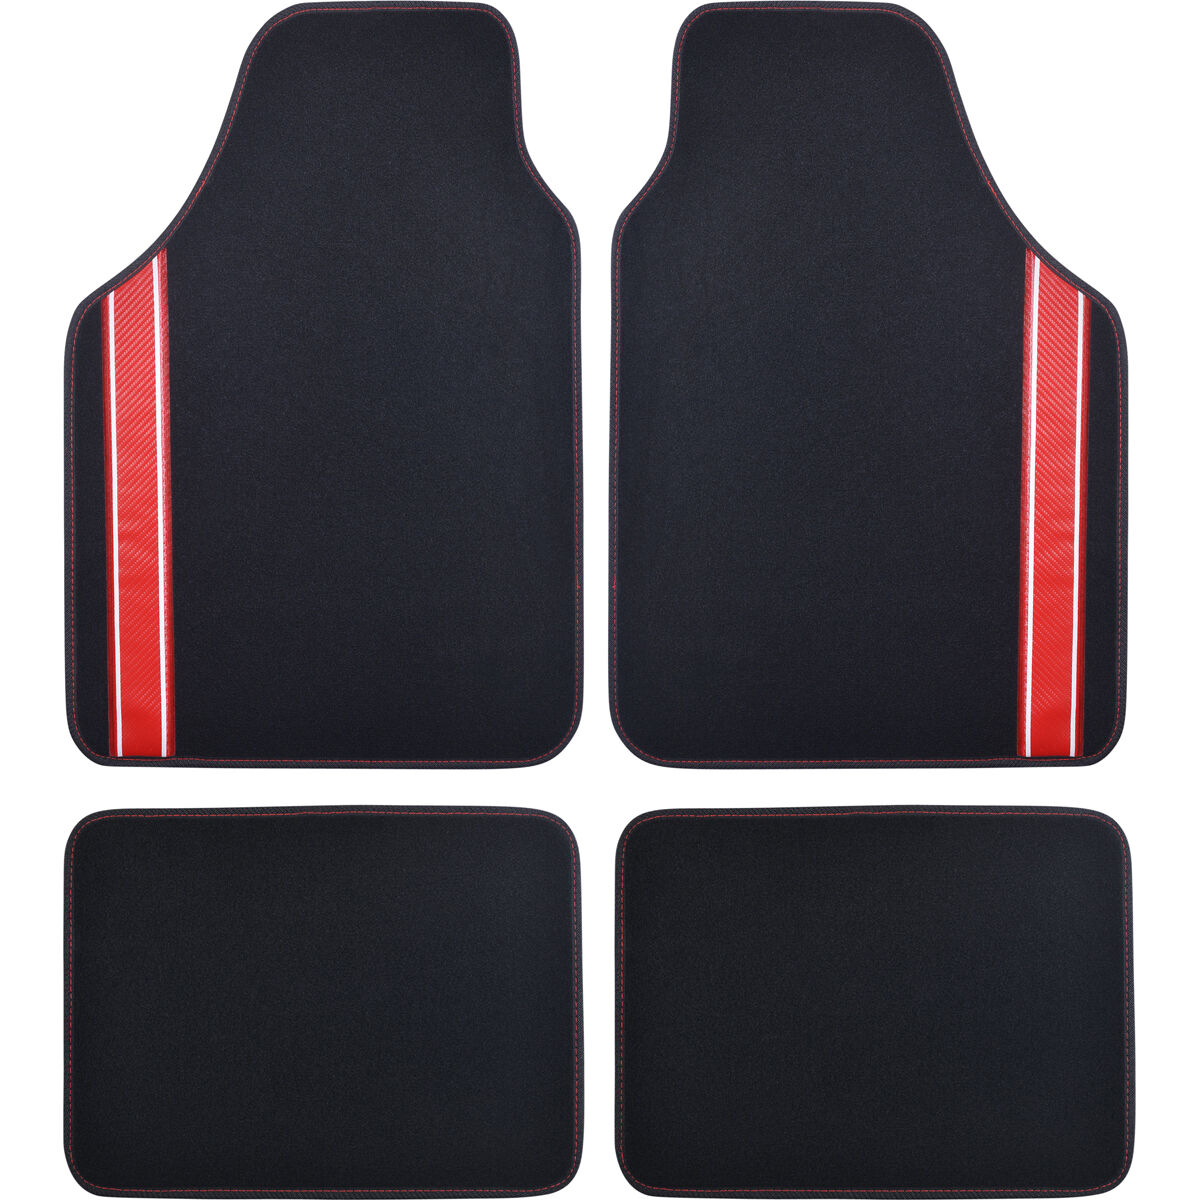 Custom Car Floor Mats Customizable 95% car Model All Weather Waterproof Non-Slip Full Covered Protection Advanced Performance Liners Car Liner Beige 